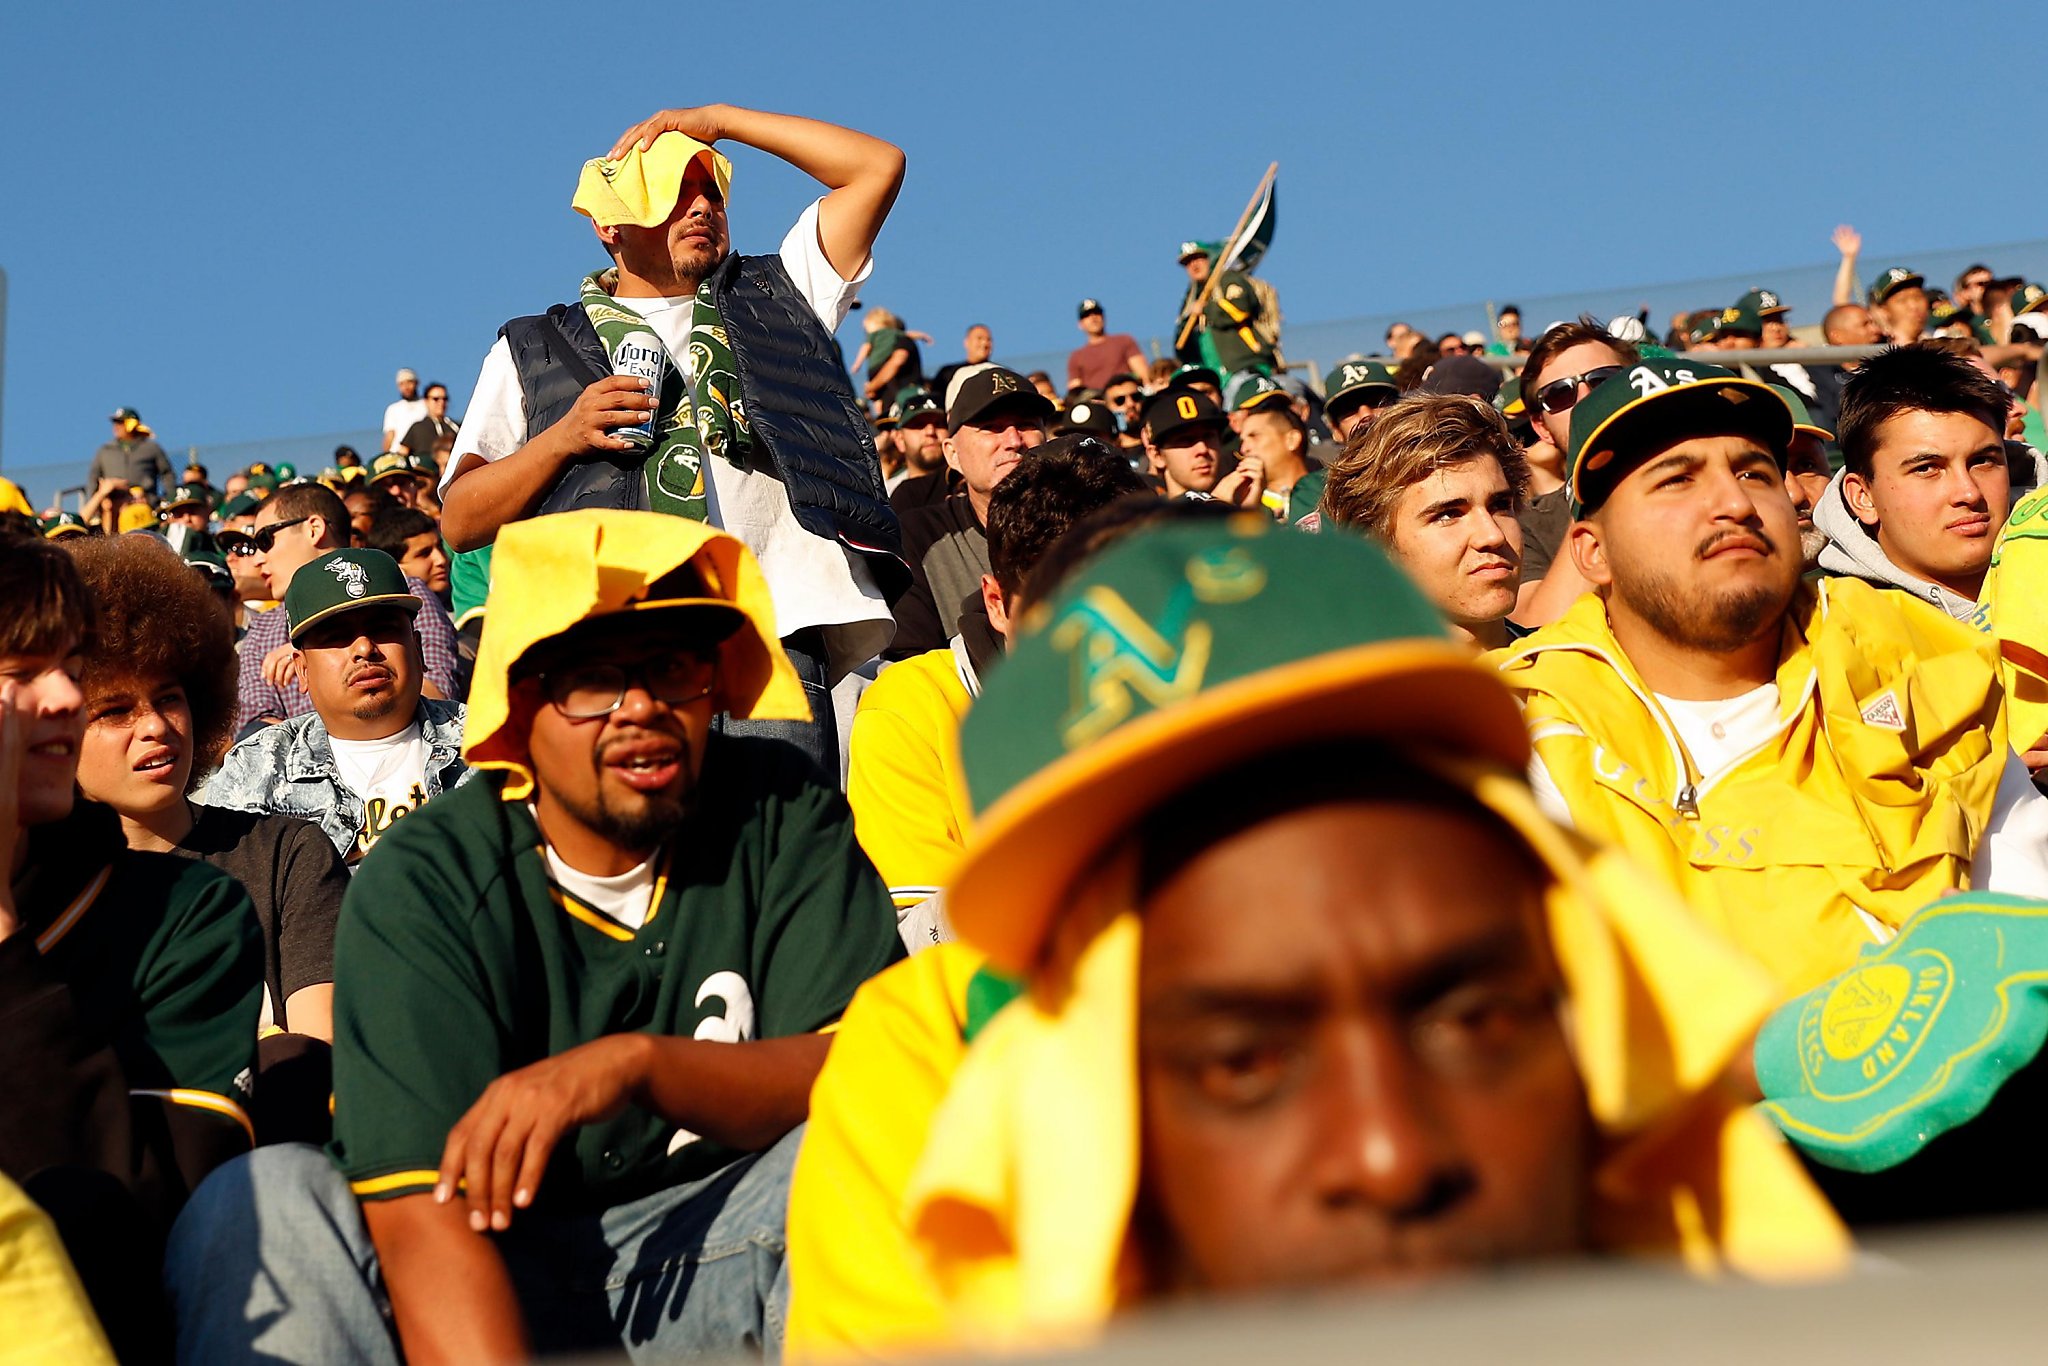 Oakland A's fans rejoice as baseball is back at last: 'It's been a